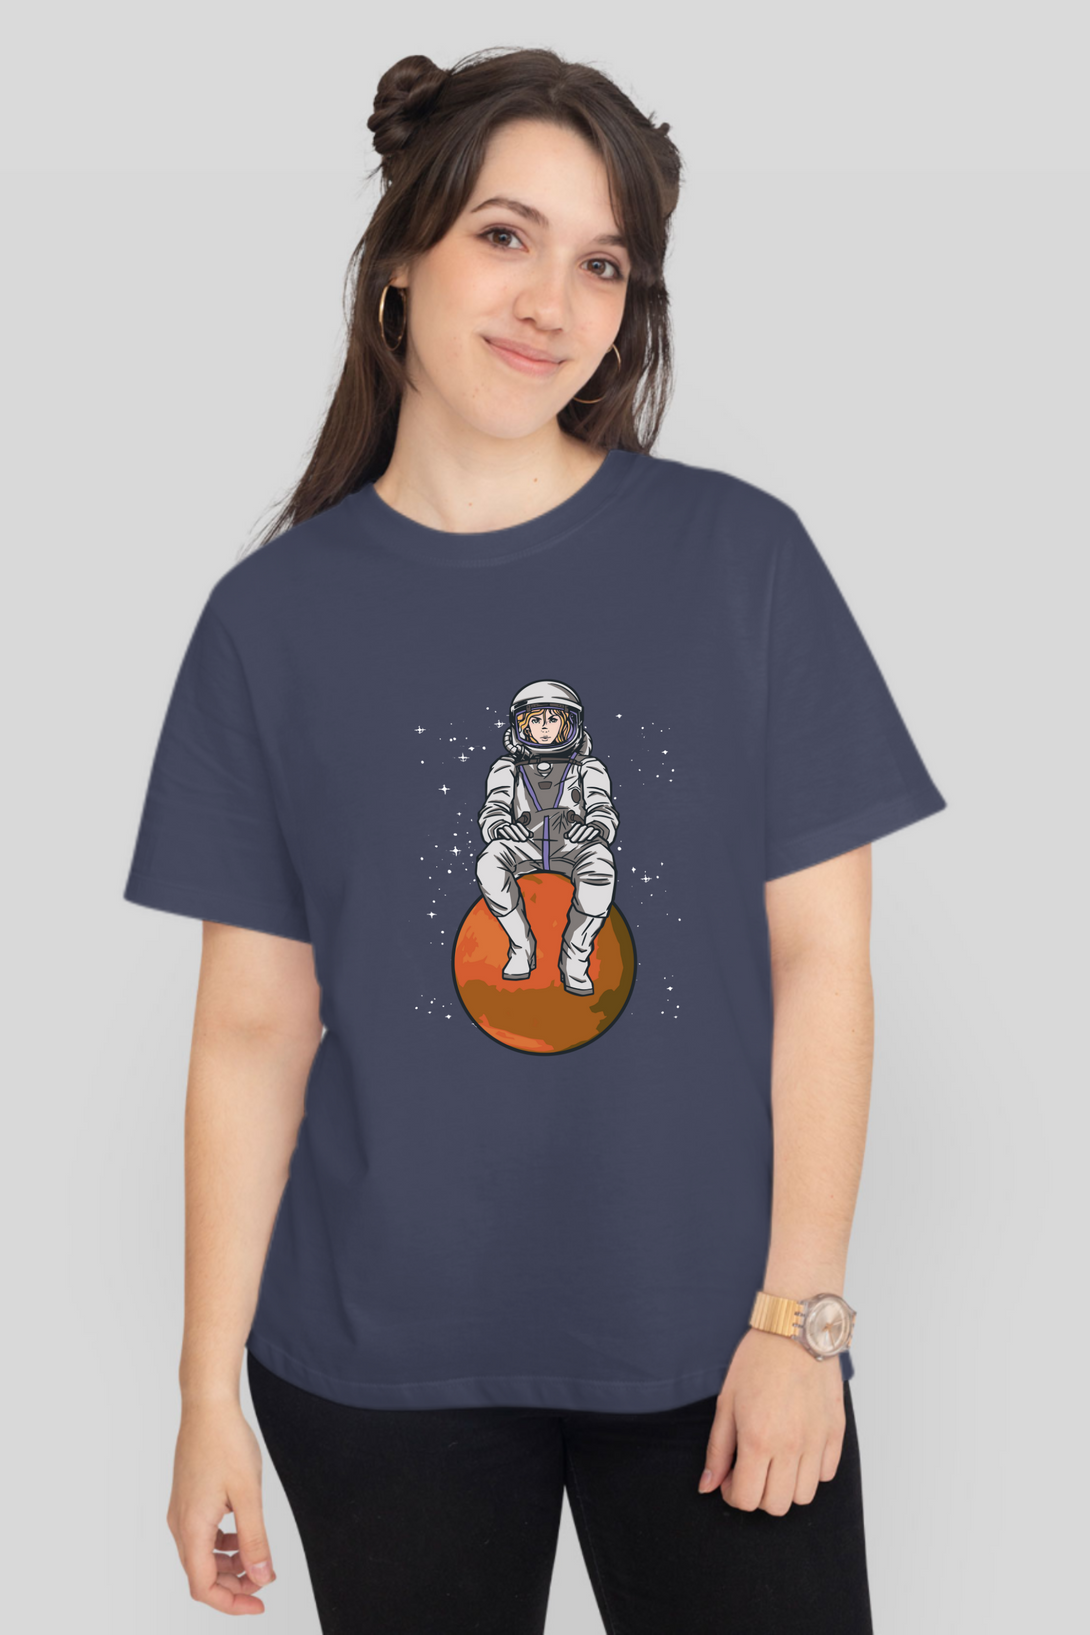 Space Explorer Printed T-Shirt For Women - WowWaves - 9